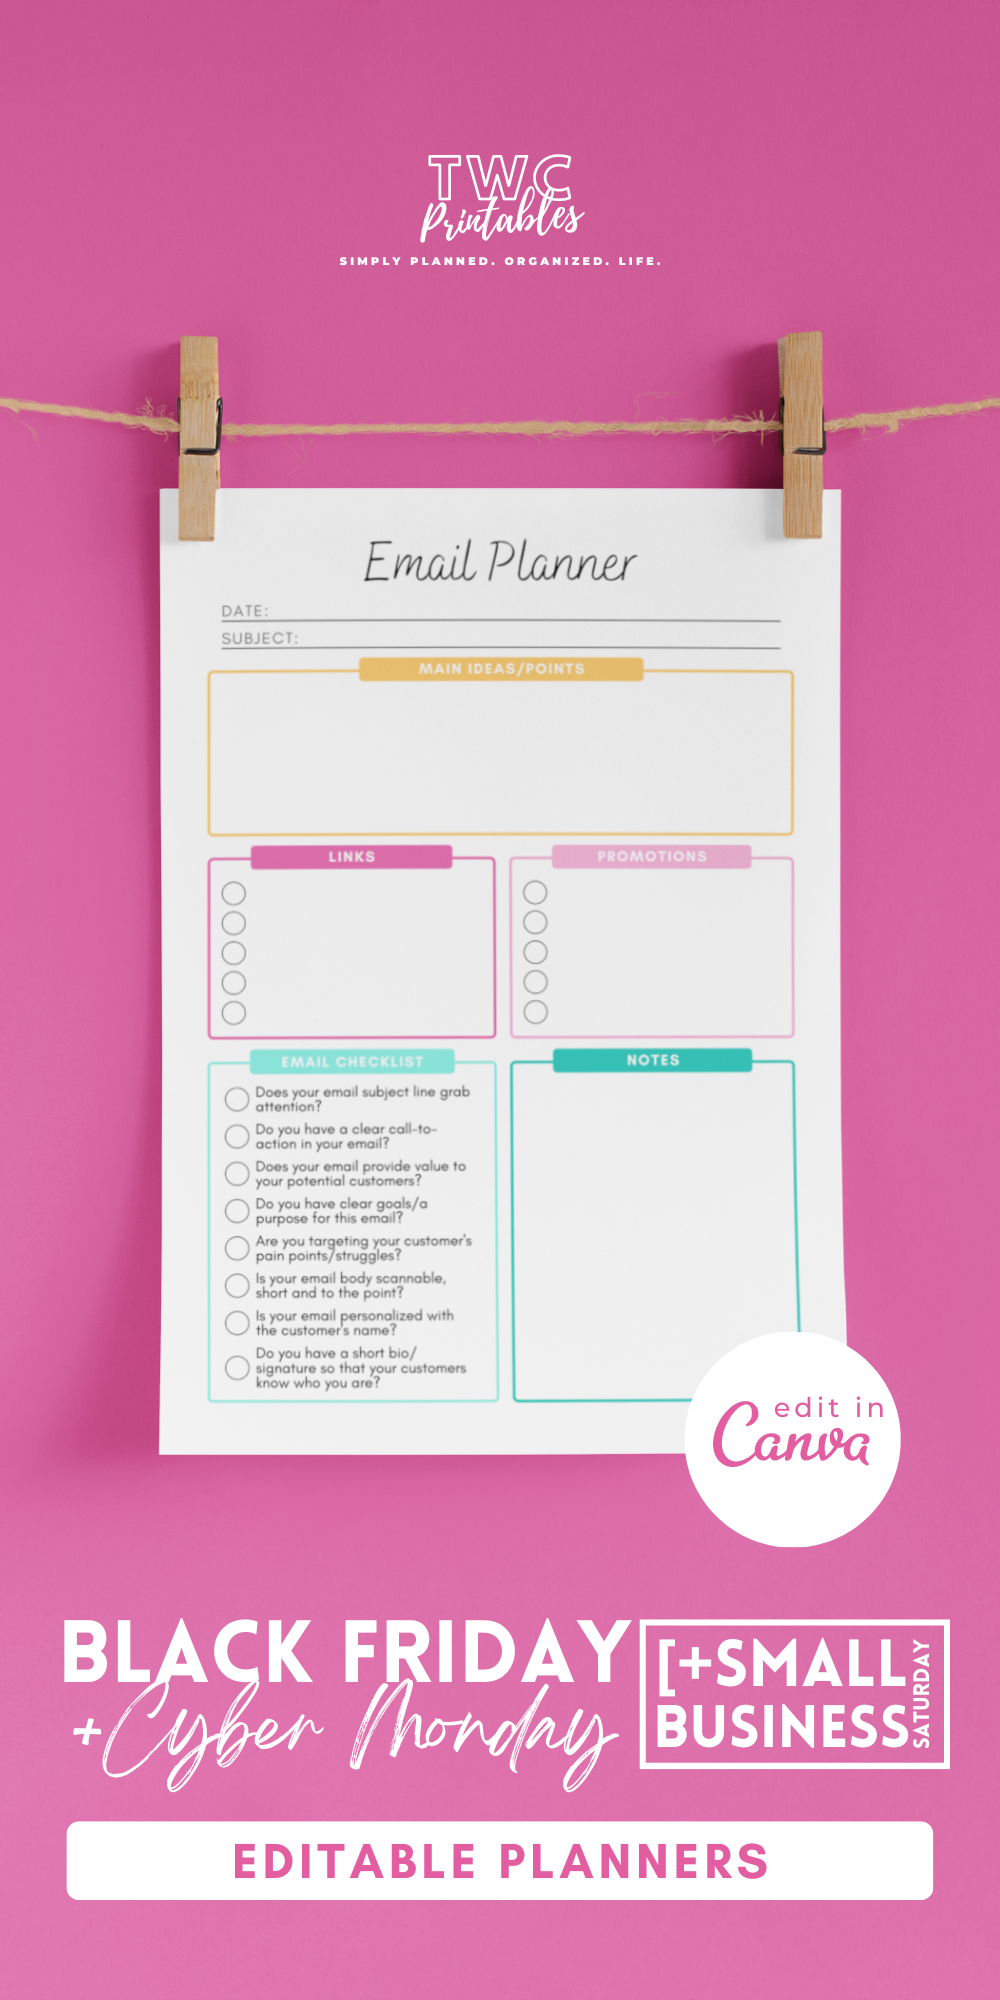 Email Planner - Black Friday Sales Planner Canva Templates